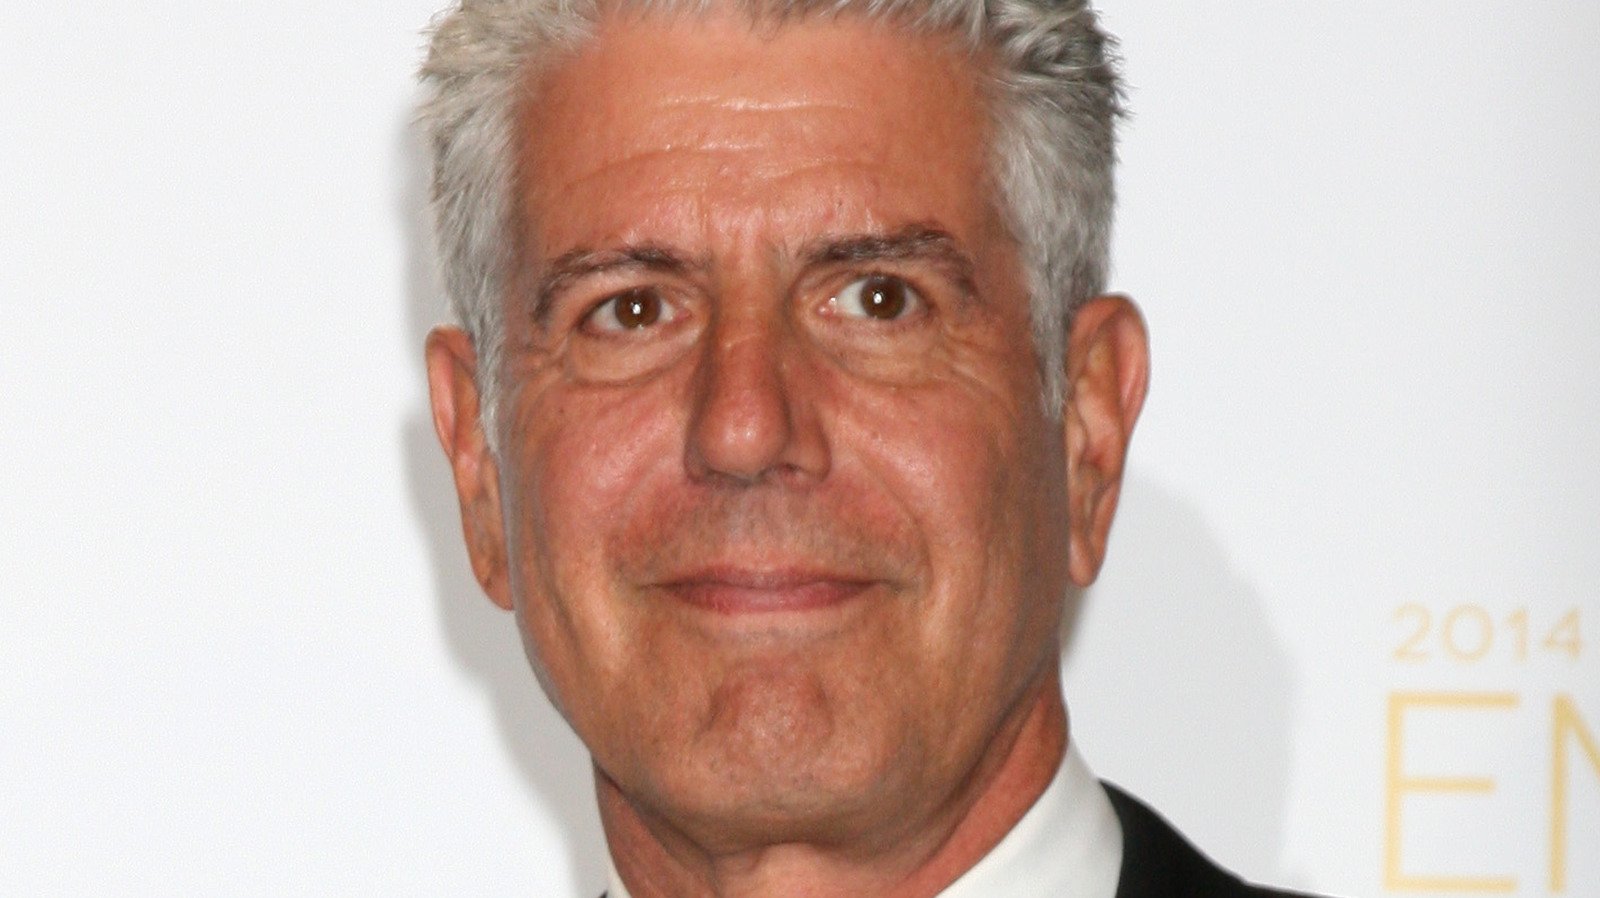 The Real Reason Anthony Bourdain Felt Conflicted About Family Life - Mashed